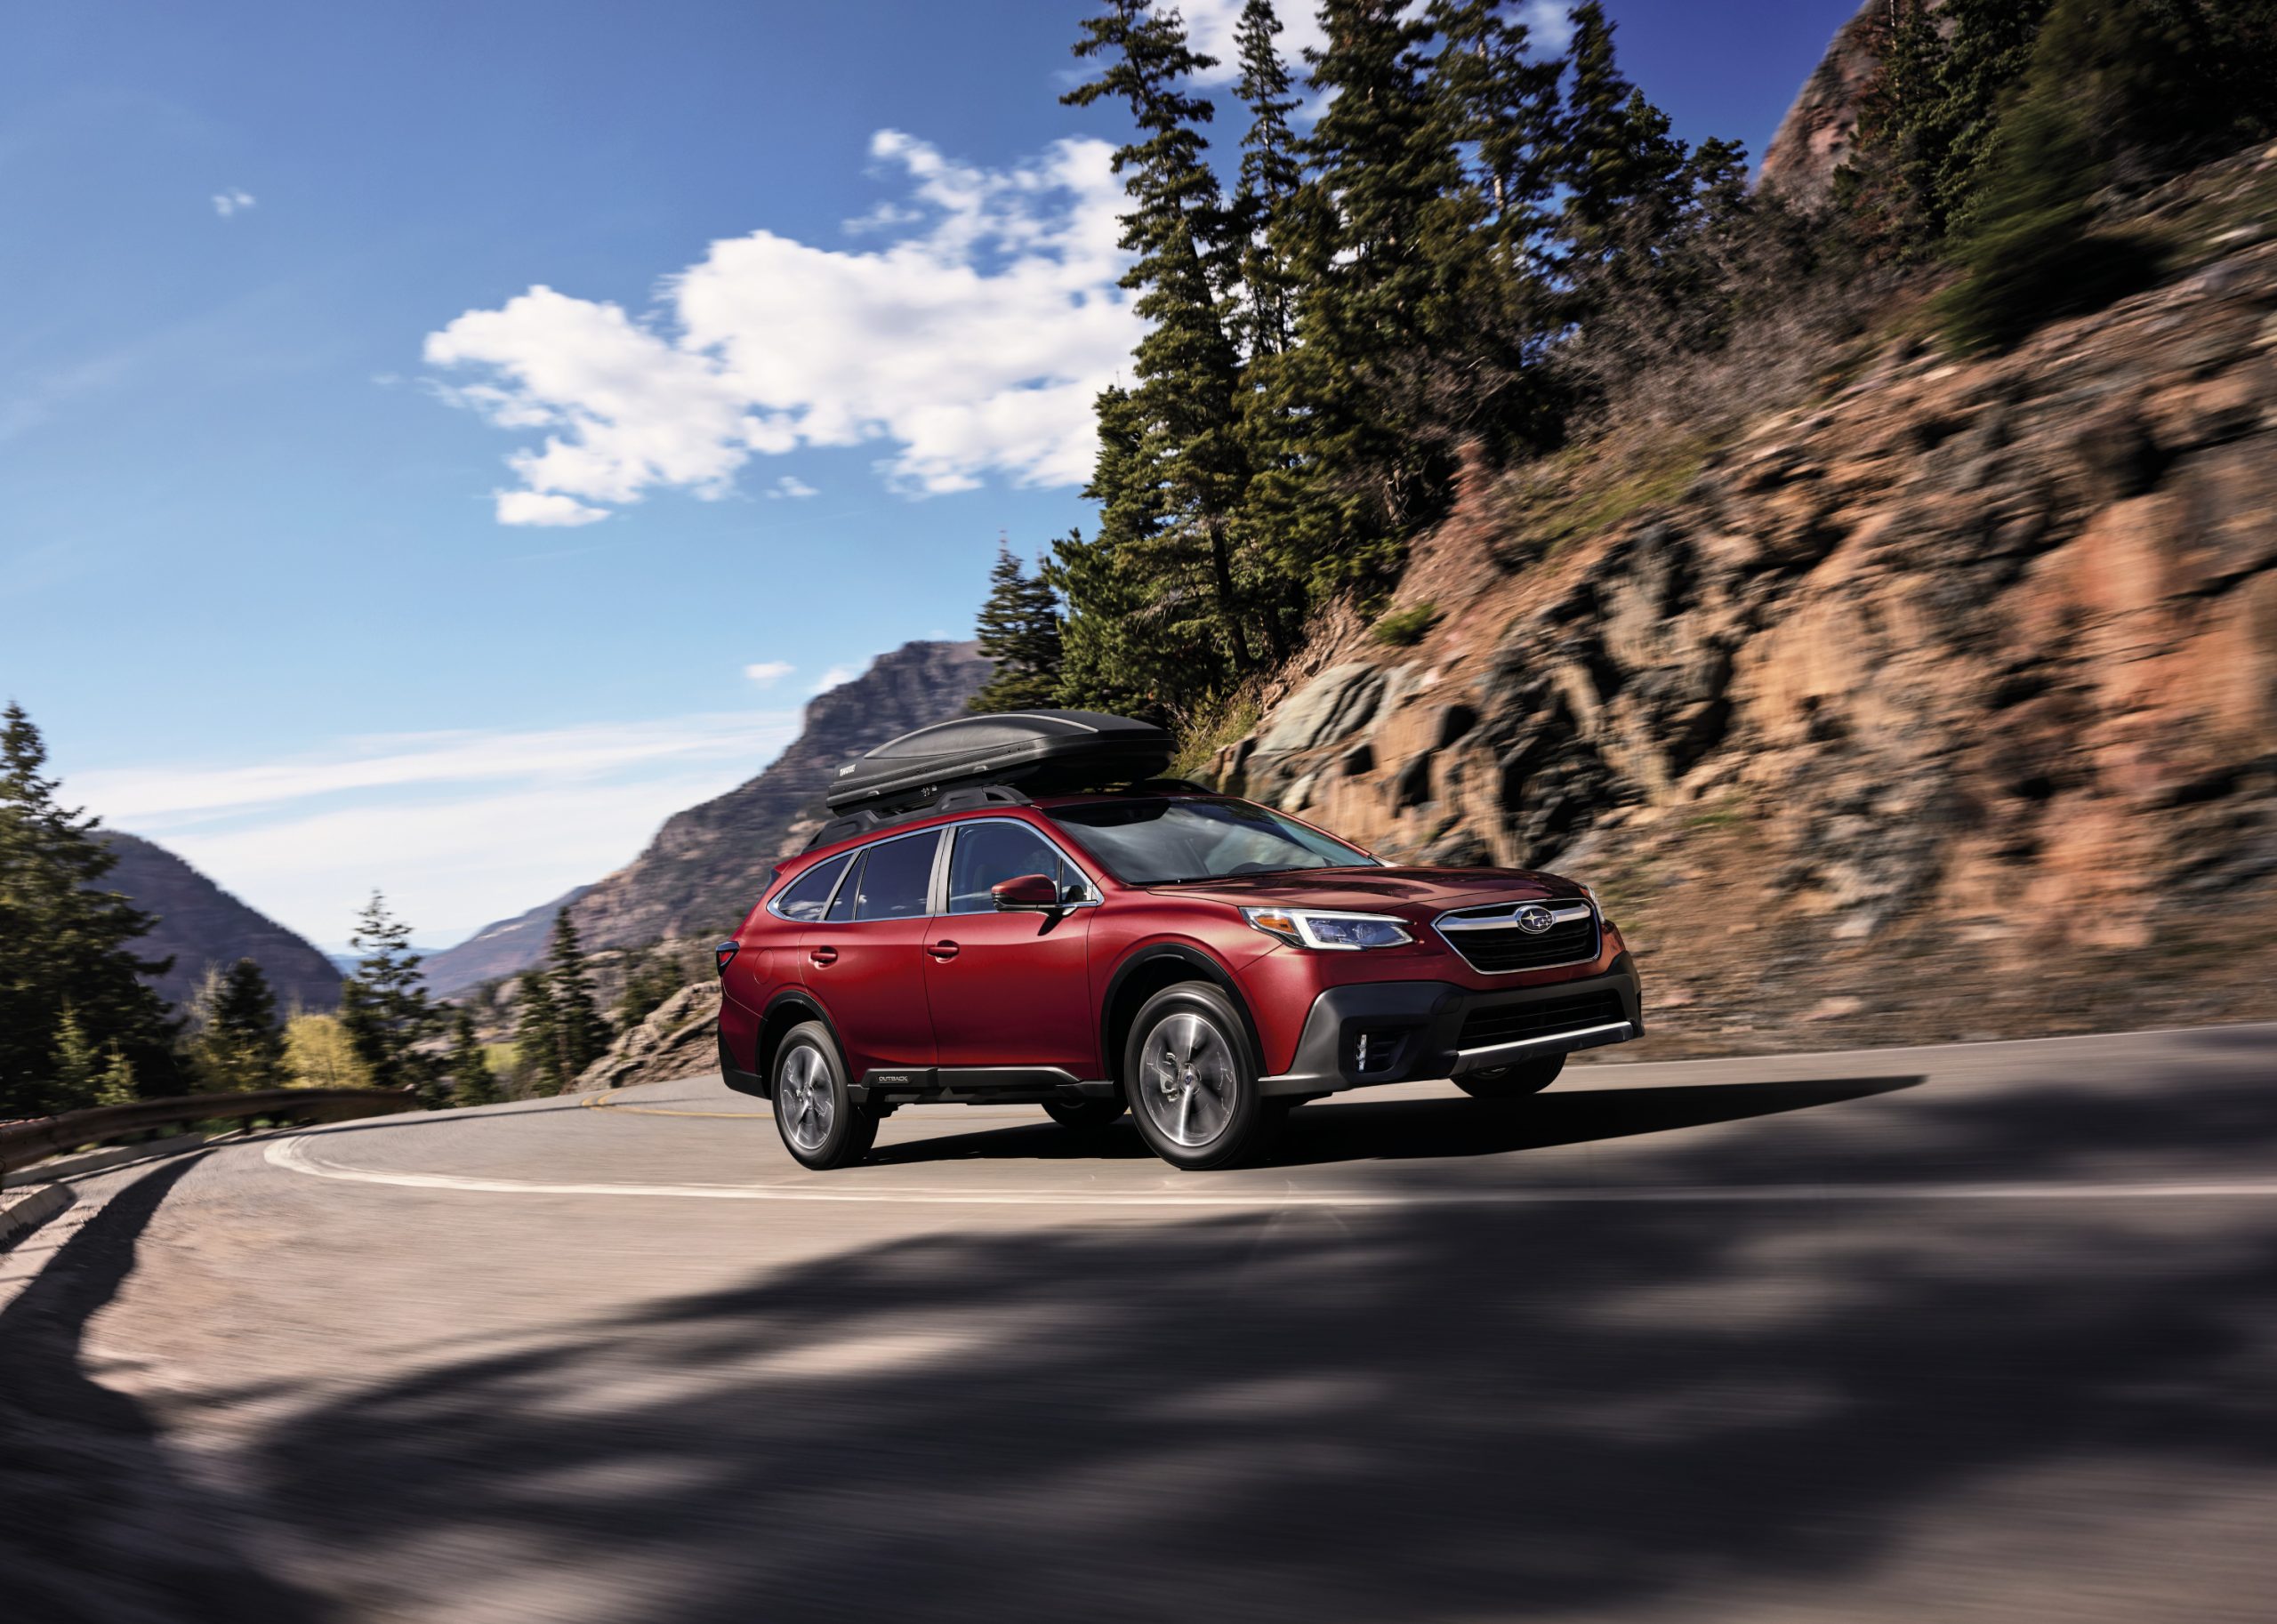 A red 2020 Subaru Outback driving down a highway road